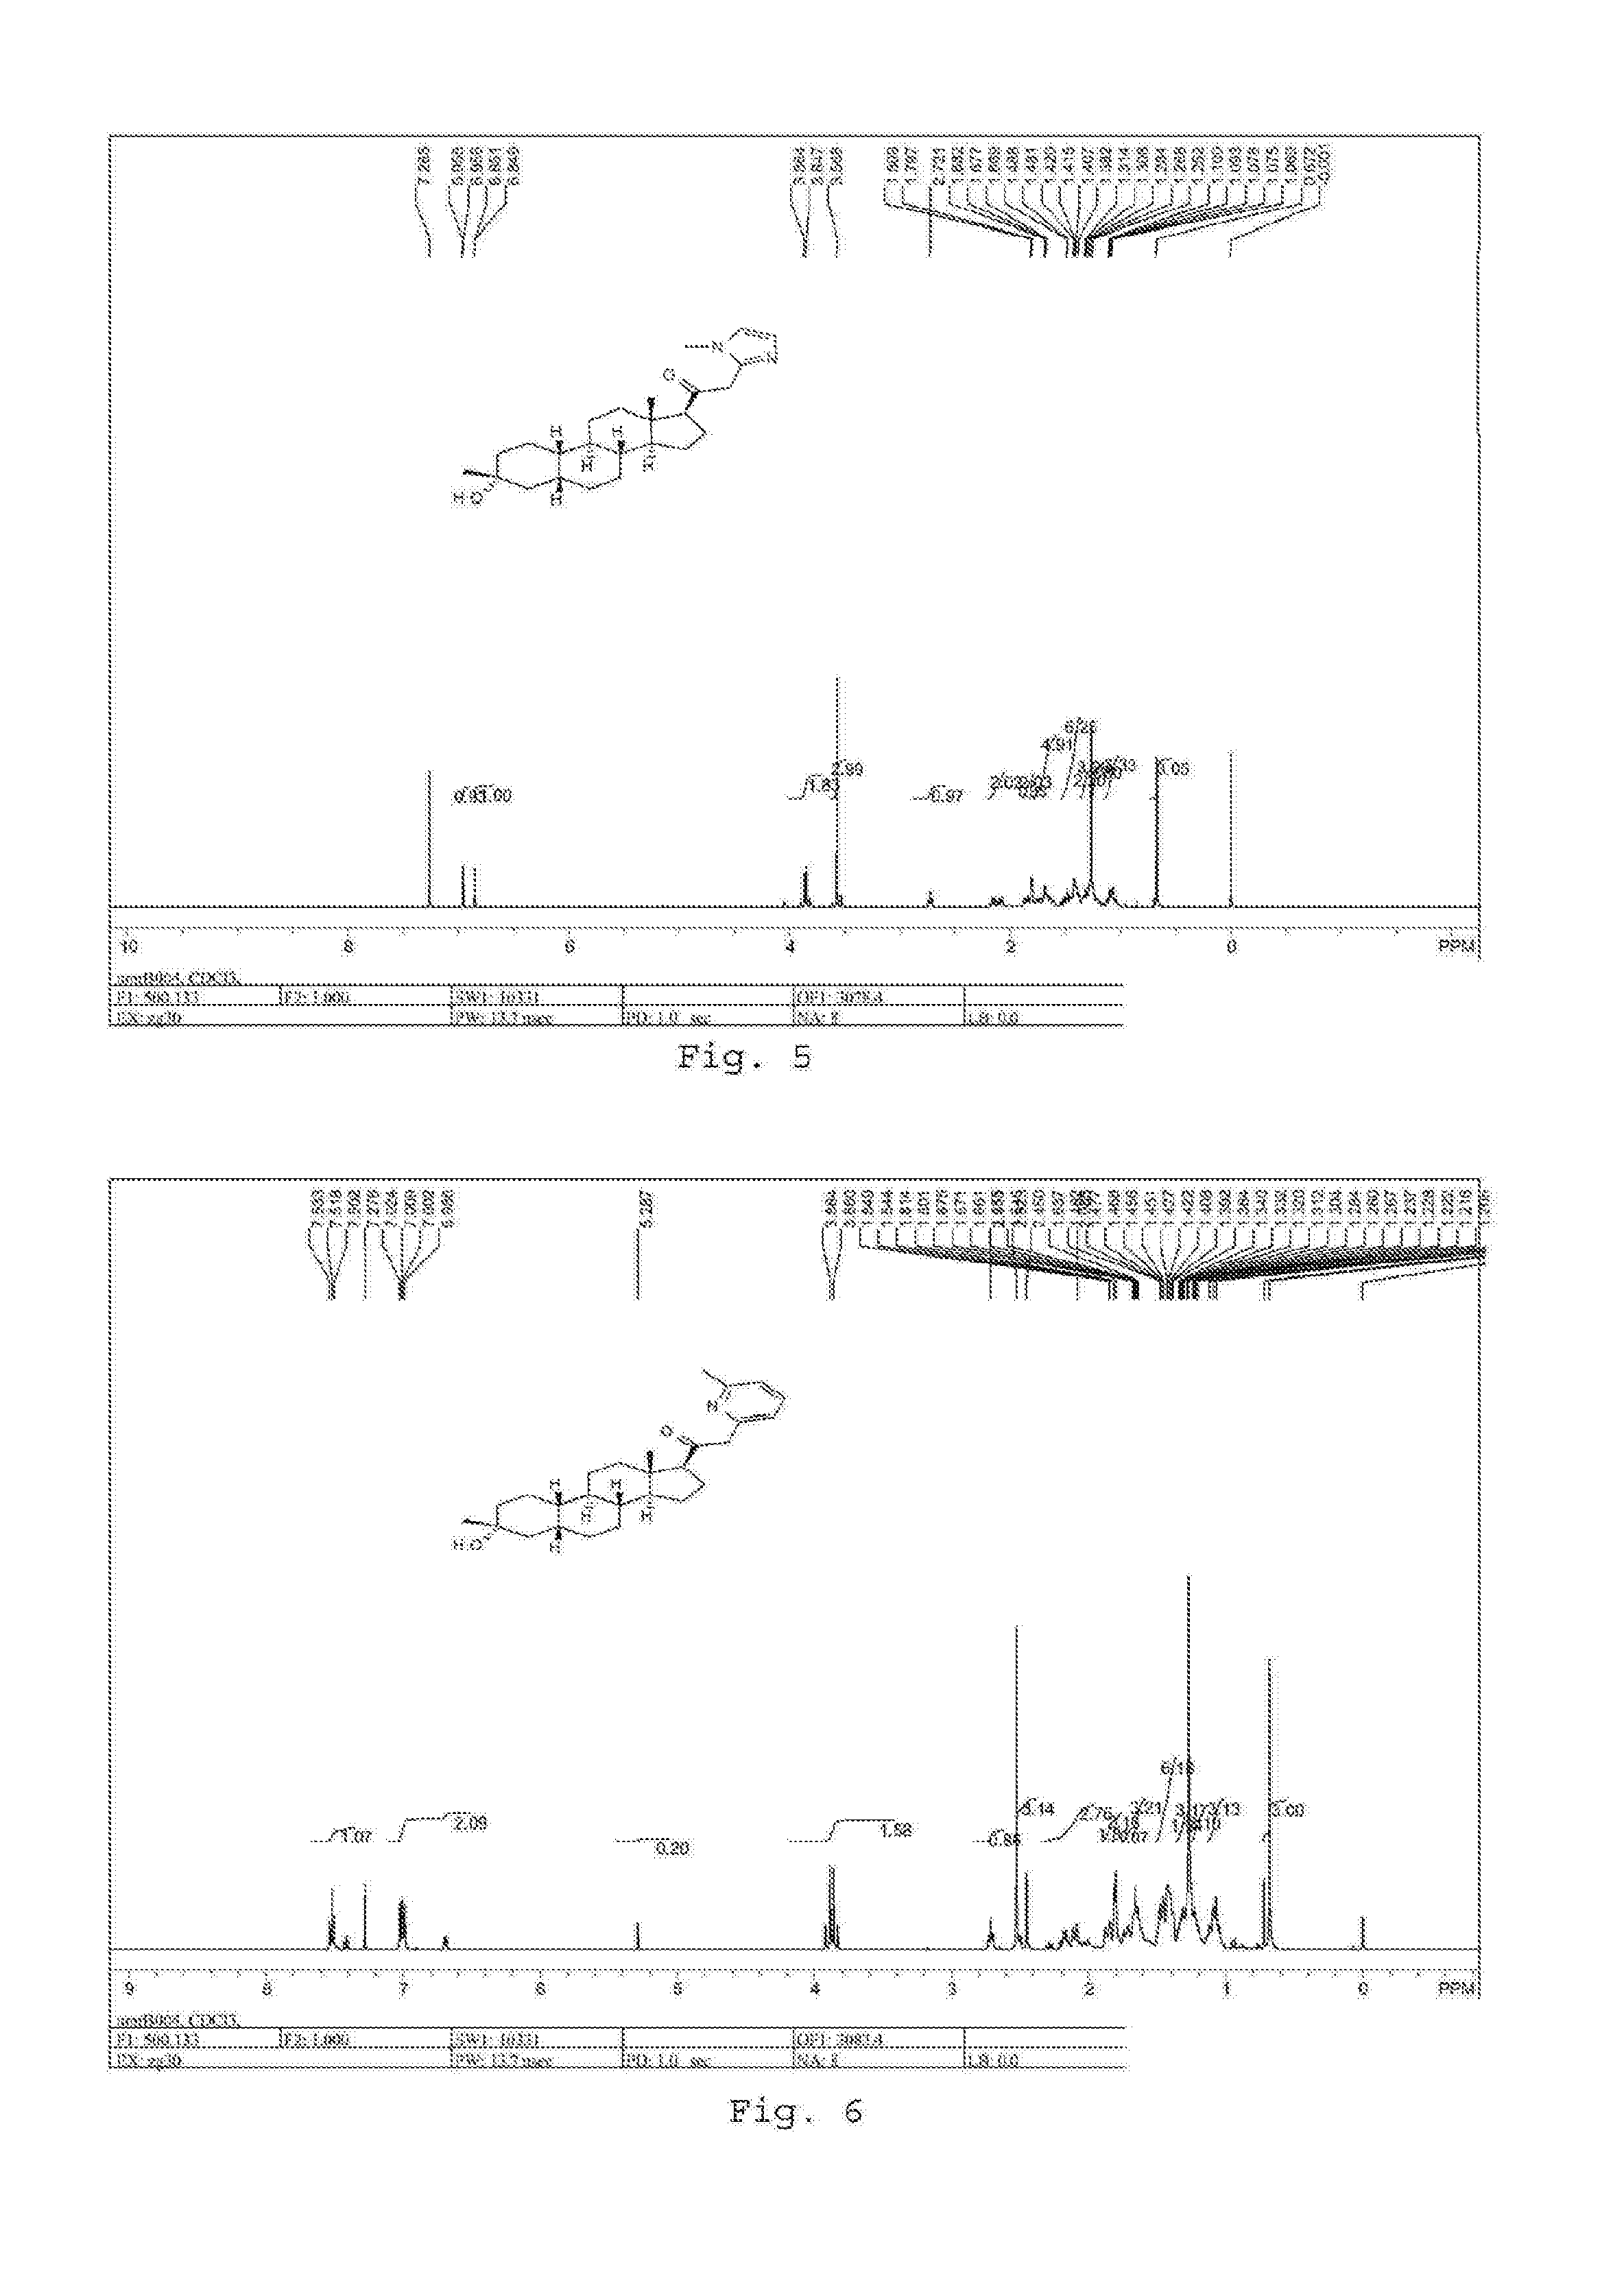 19-nor c3, 3-disubstituted c21-c-bound heteroaryl steroids and methods of use thereof